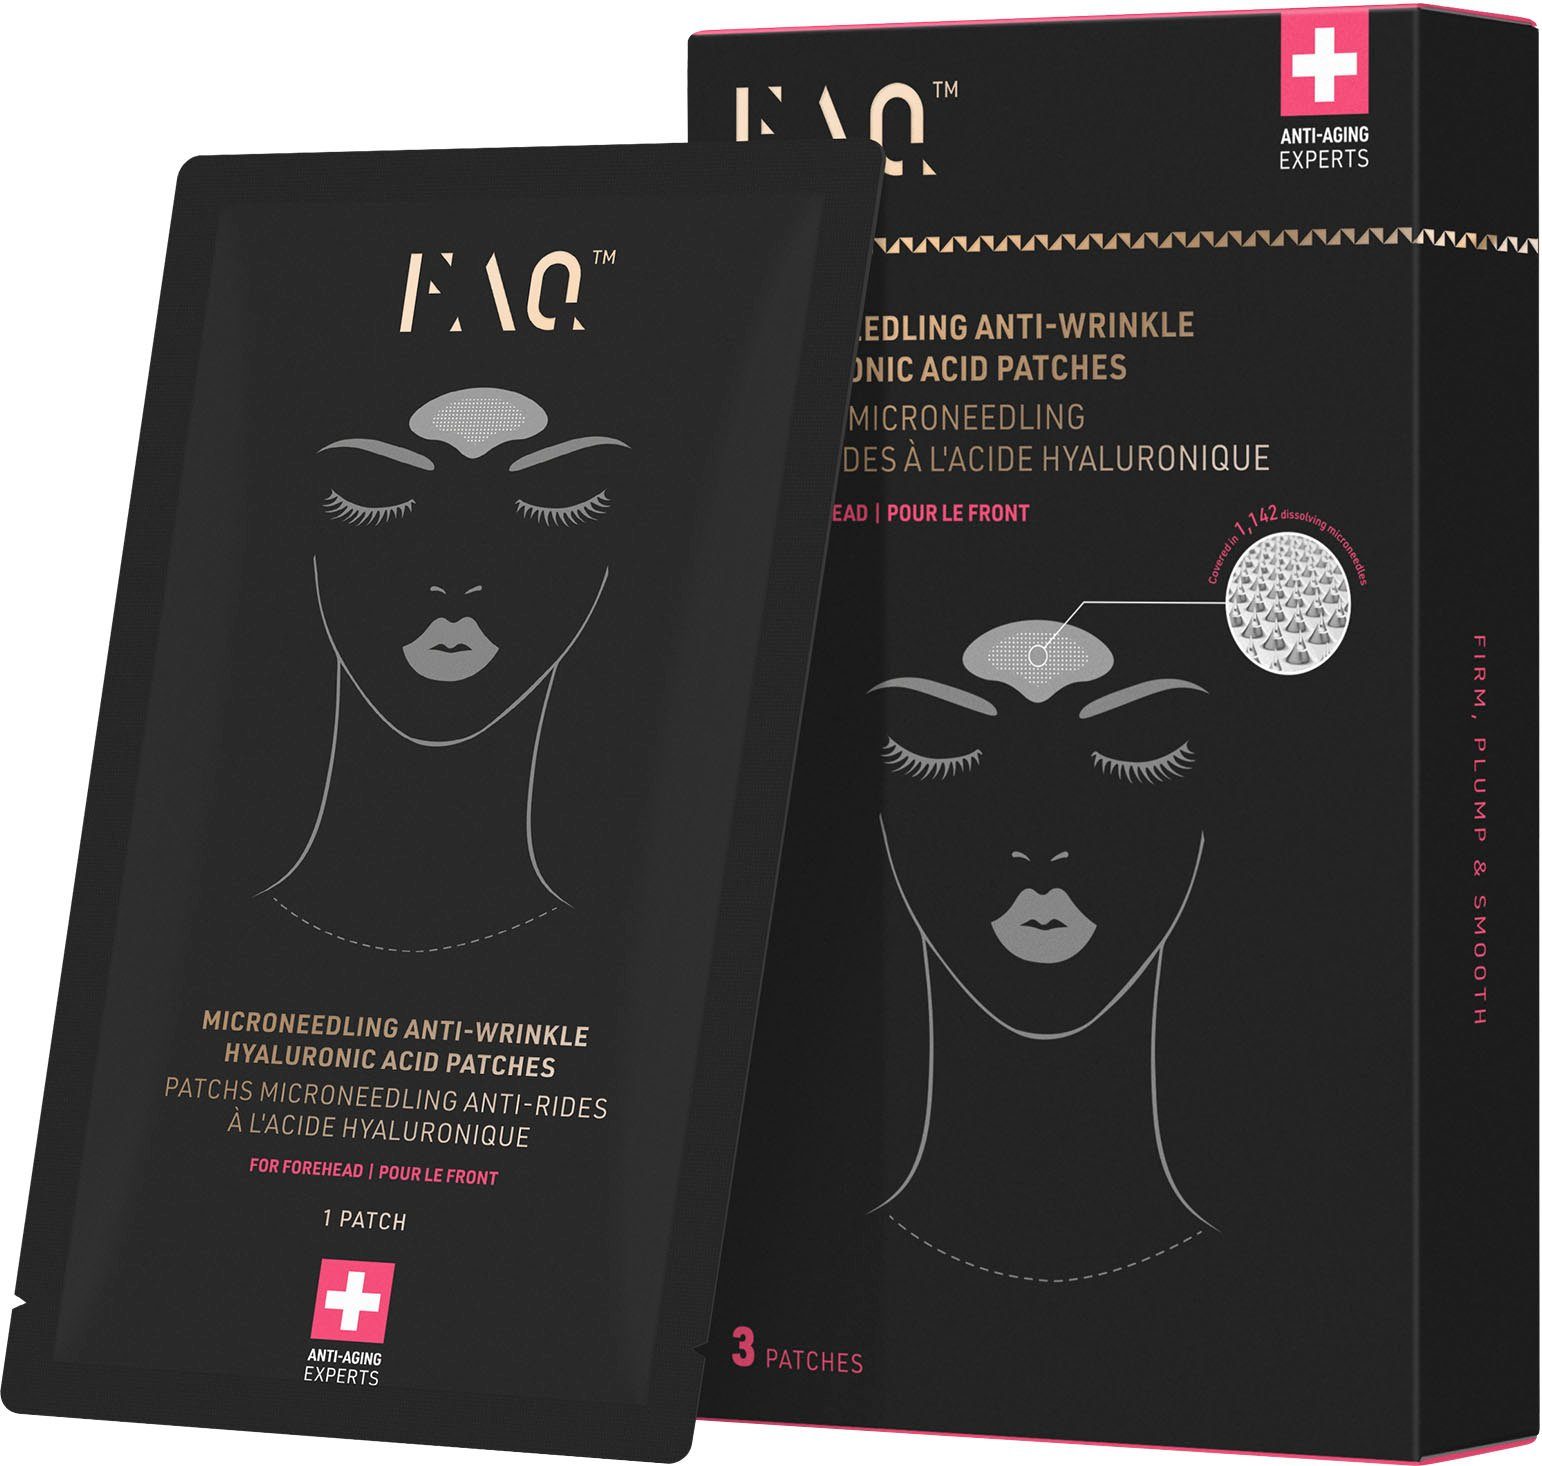 FAQ™ Patches Acid FAQ™ Hyaluron Microneedling Serum Anti-Wrinkle For Forehead Hyaluronic